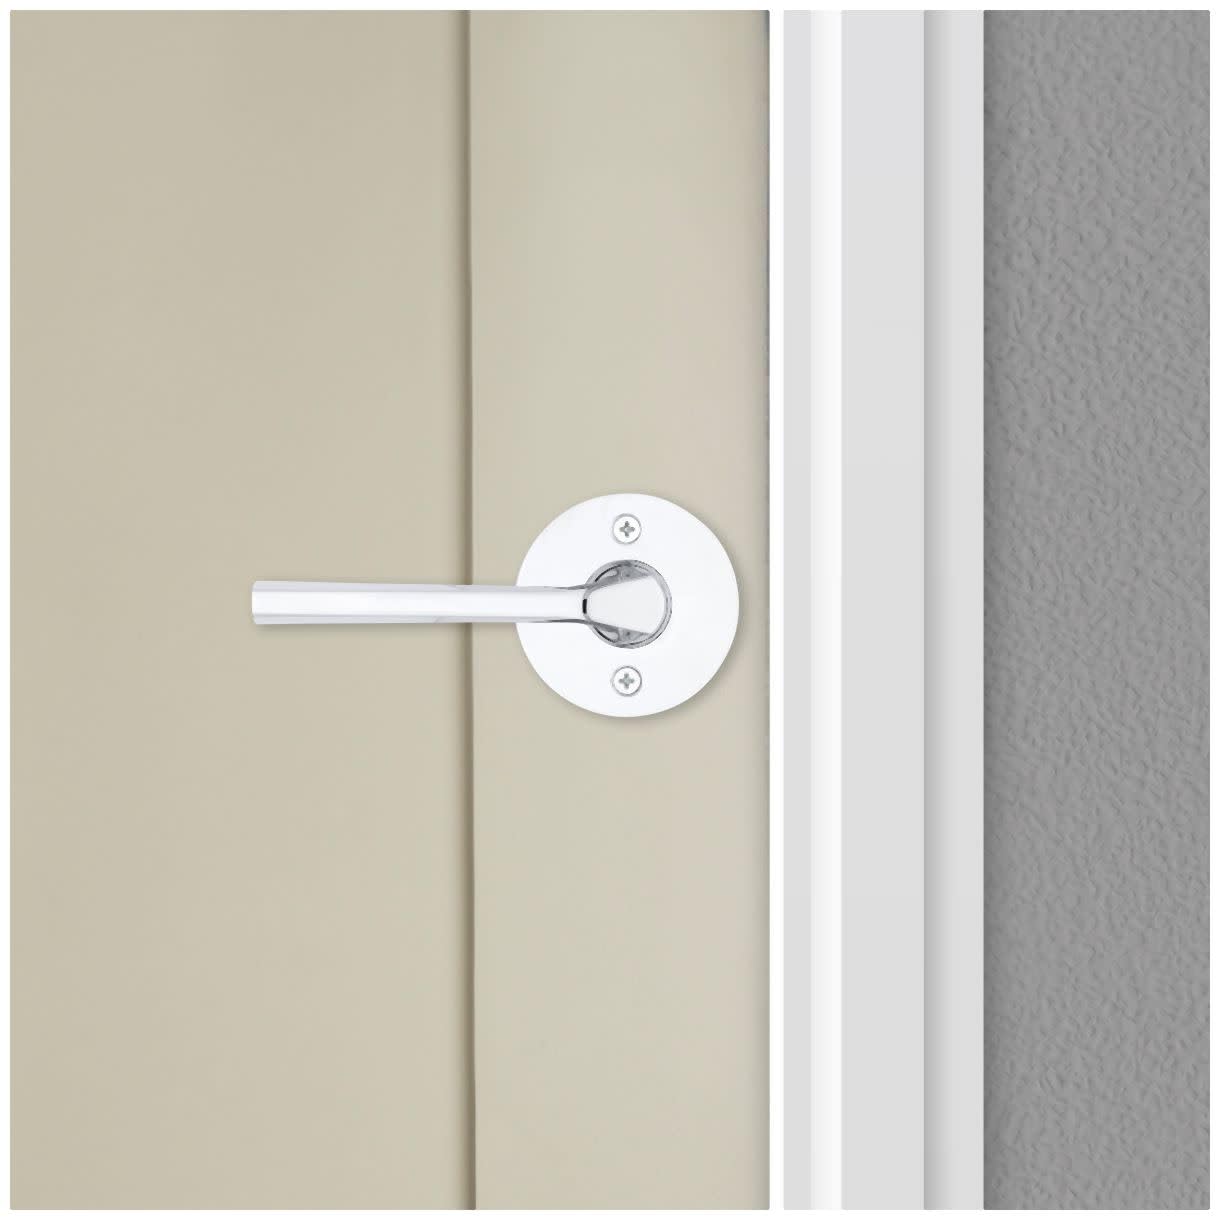 Kwikset 720LSLRDT-26 Lisbon Lever with Round Rose Passage Door Lock with 6AL Latch and RCS Strike Bright Chrome Finish